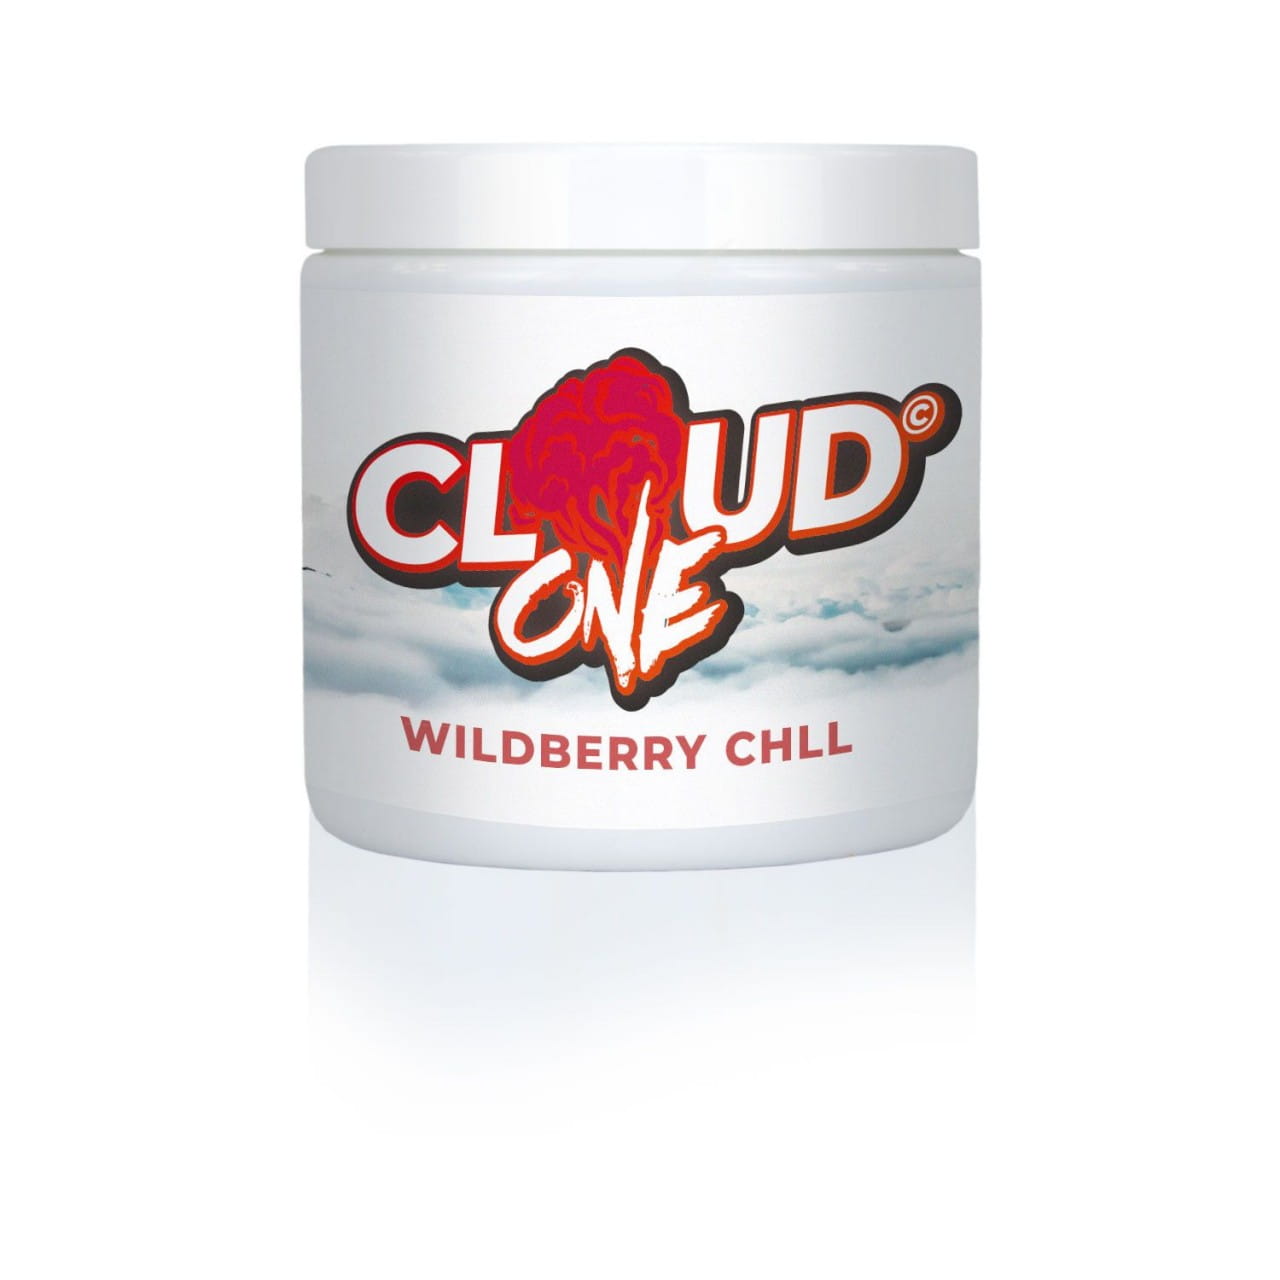 Cloud One - Wildberry Chill 200 g